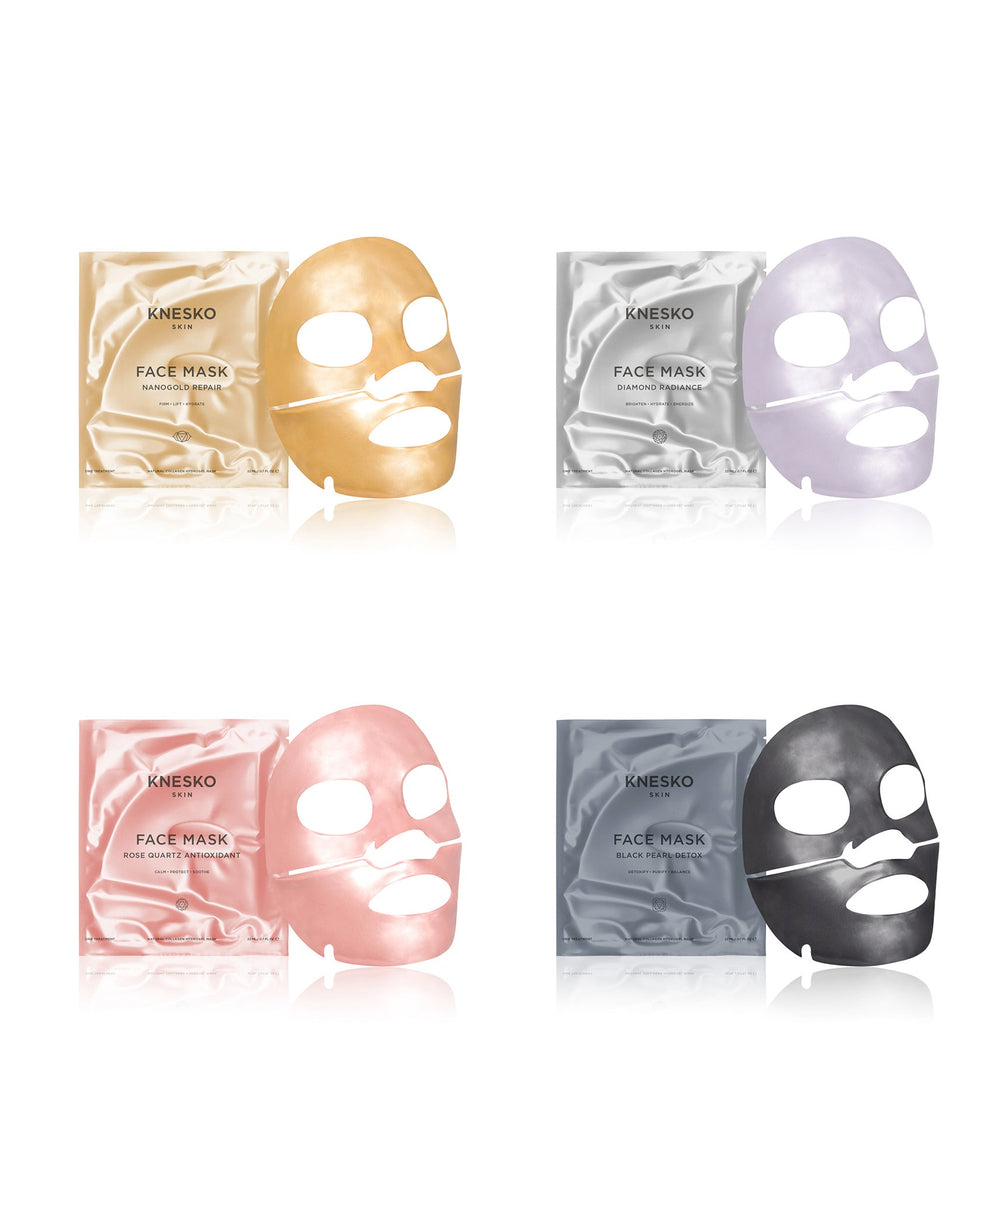 The Luxe Face Mask Kit